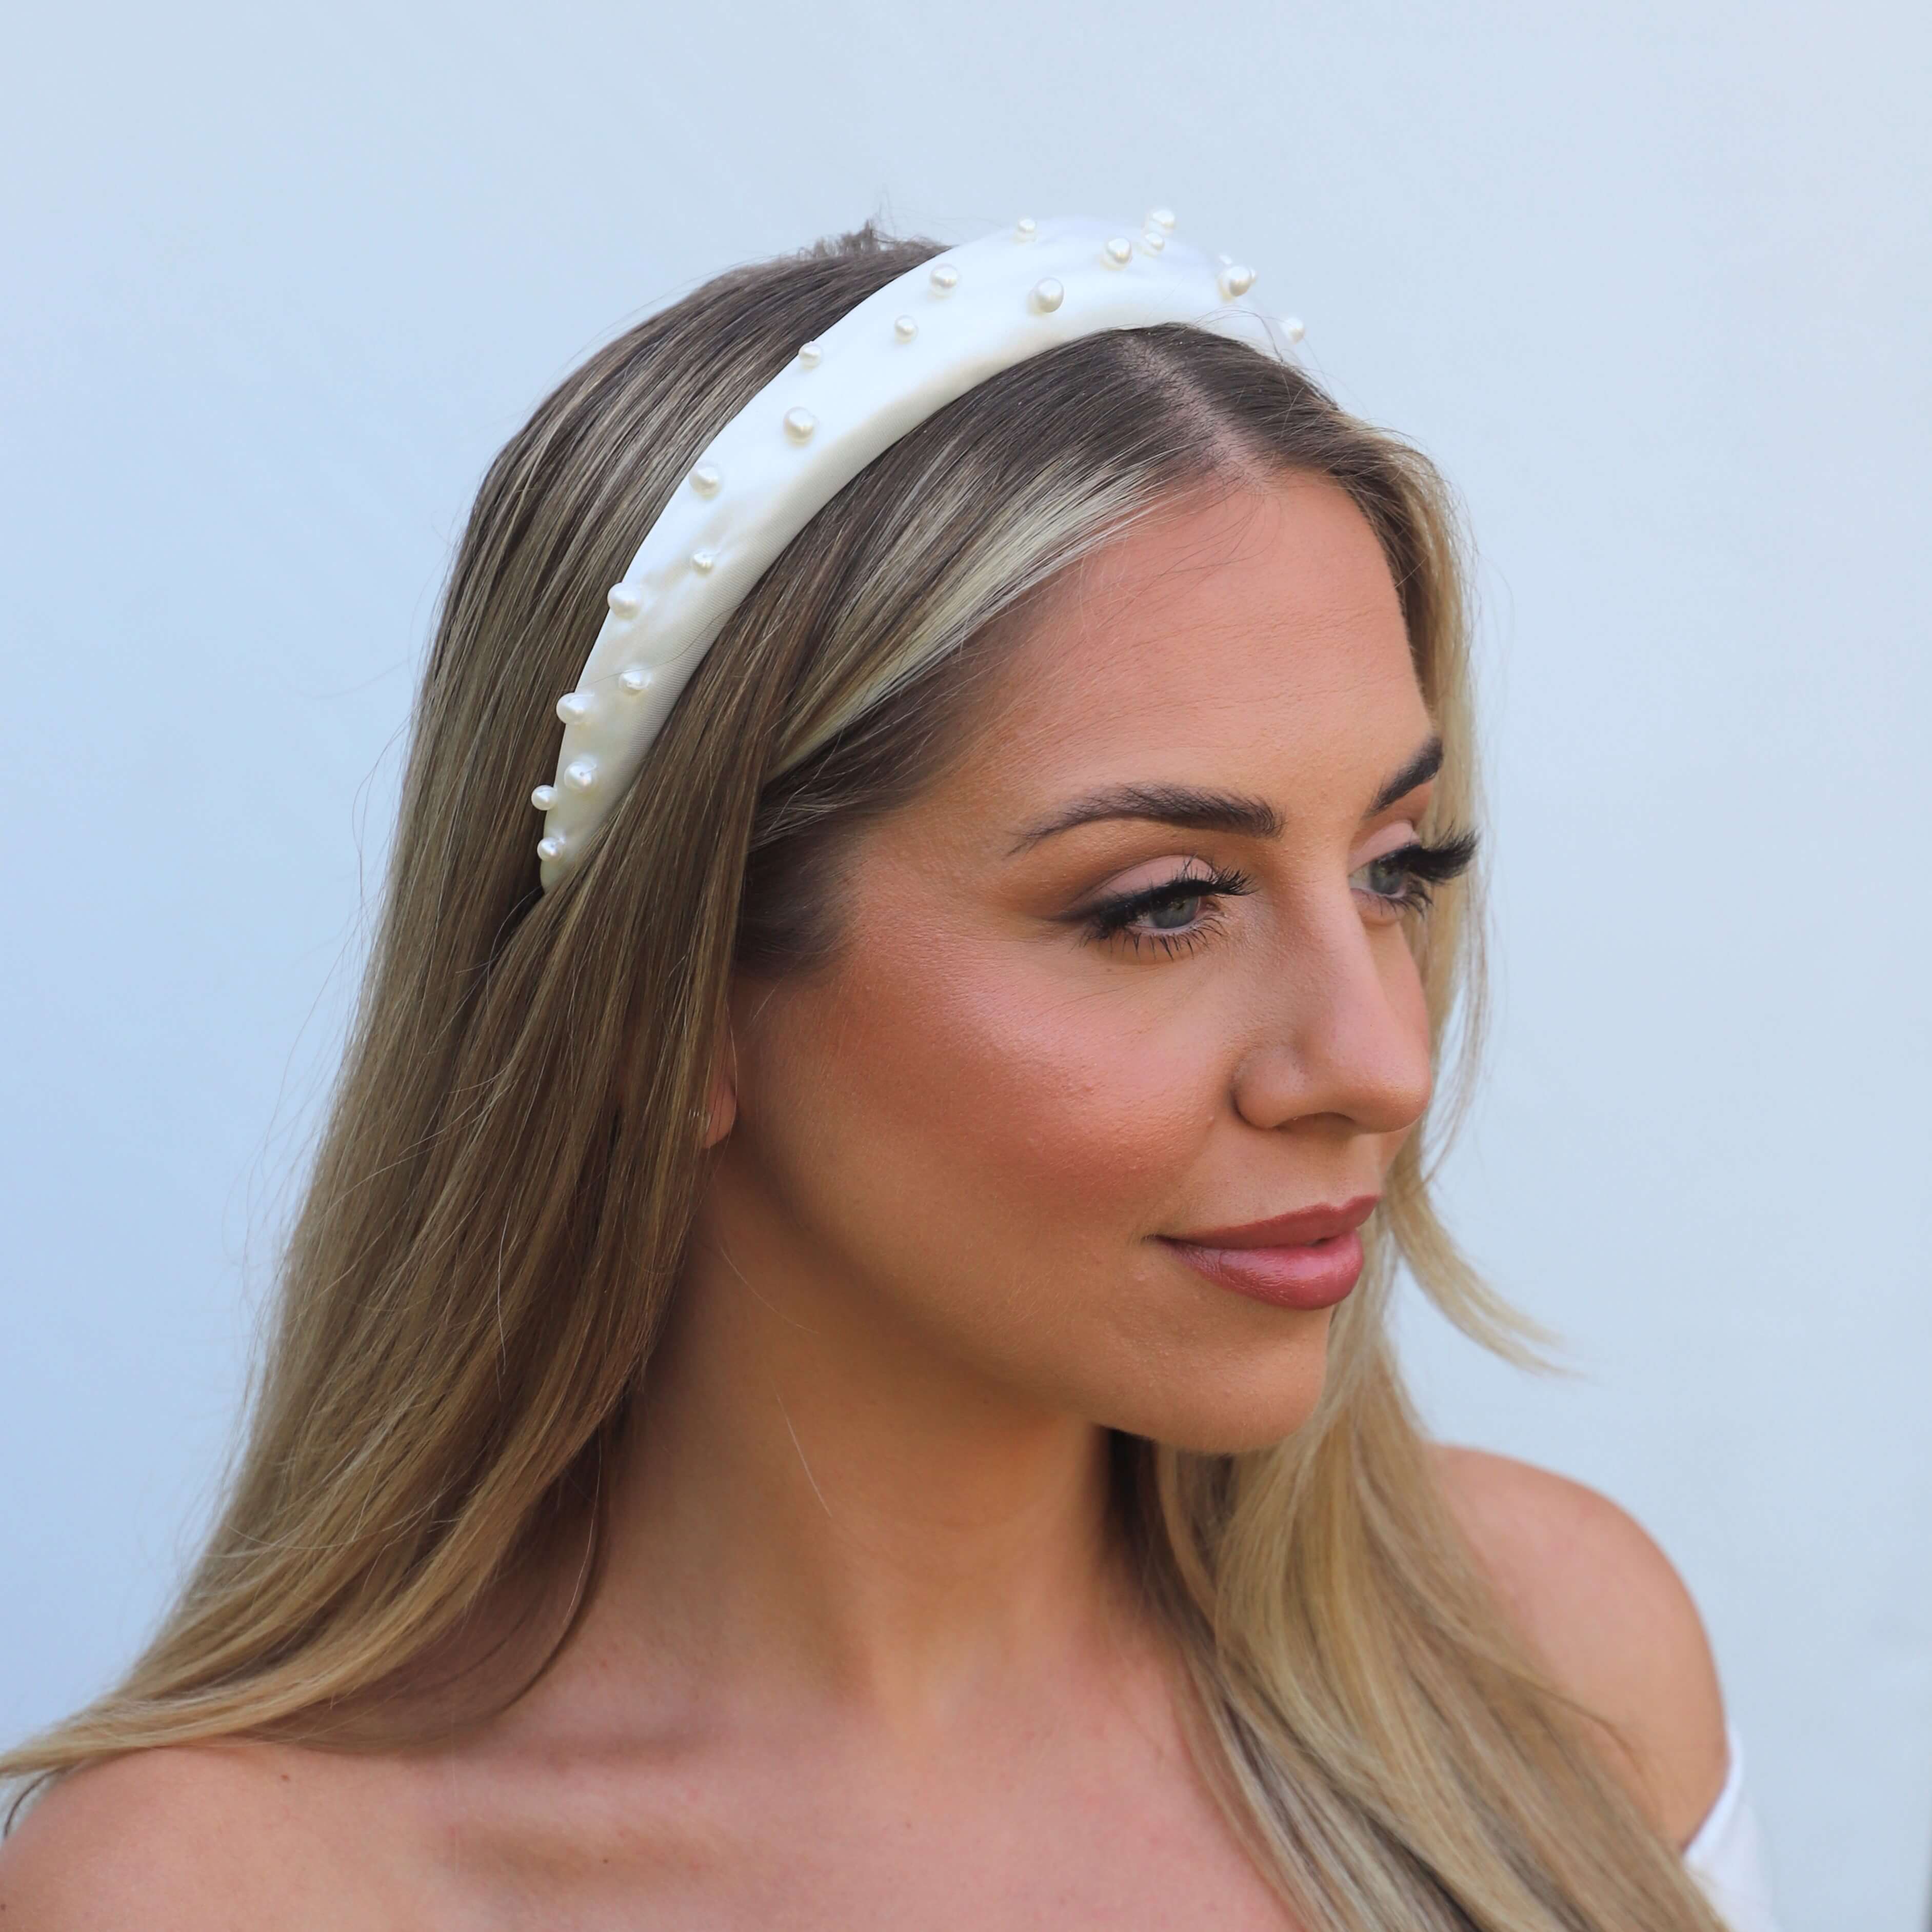 Model wearing a thick pearl headband